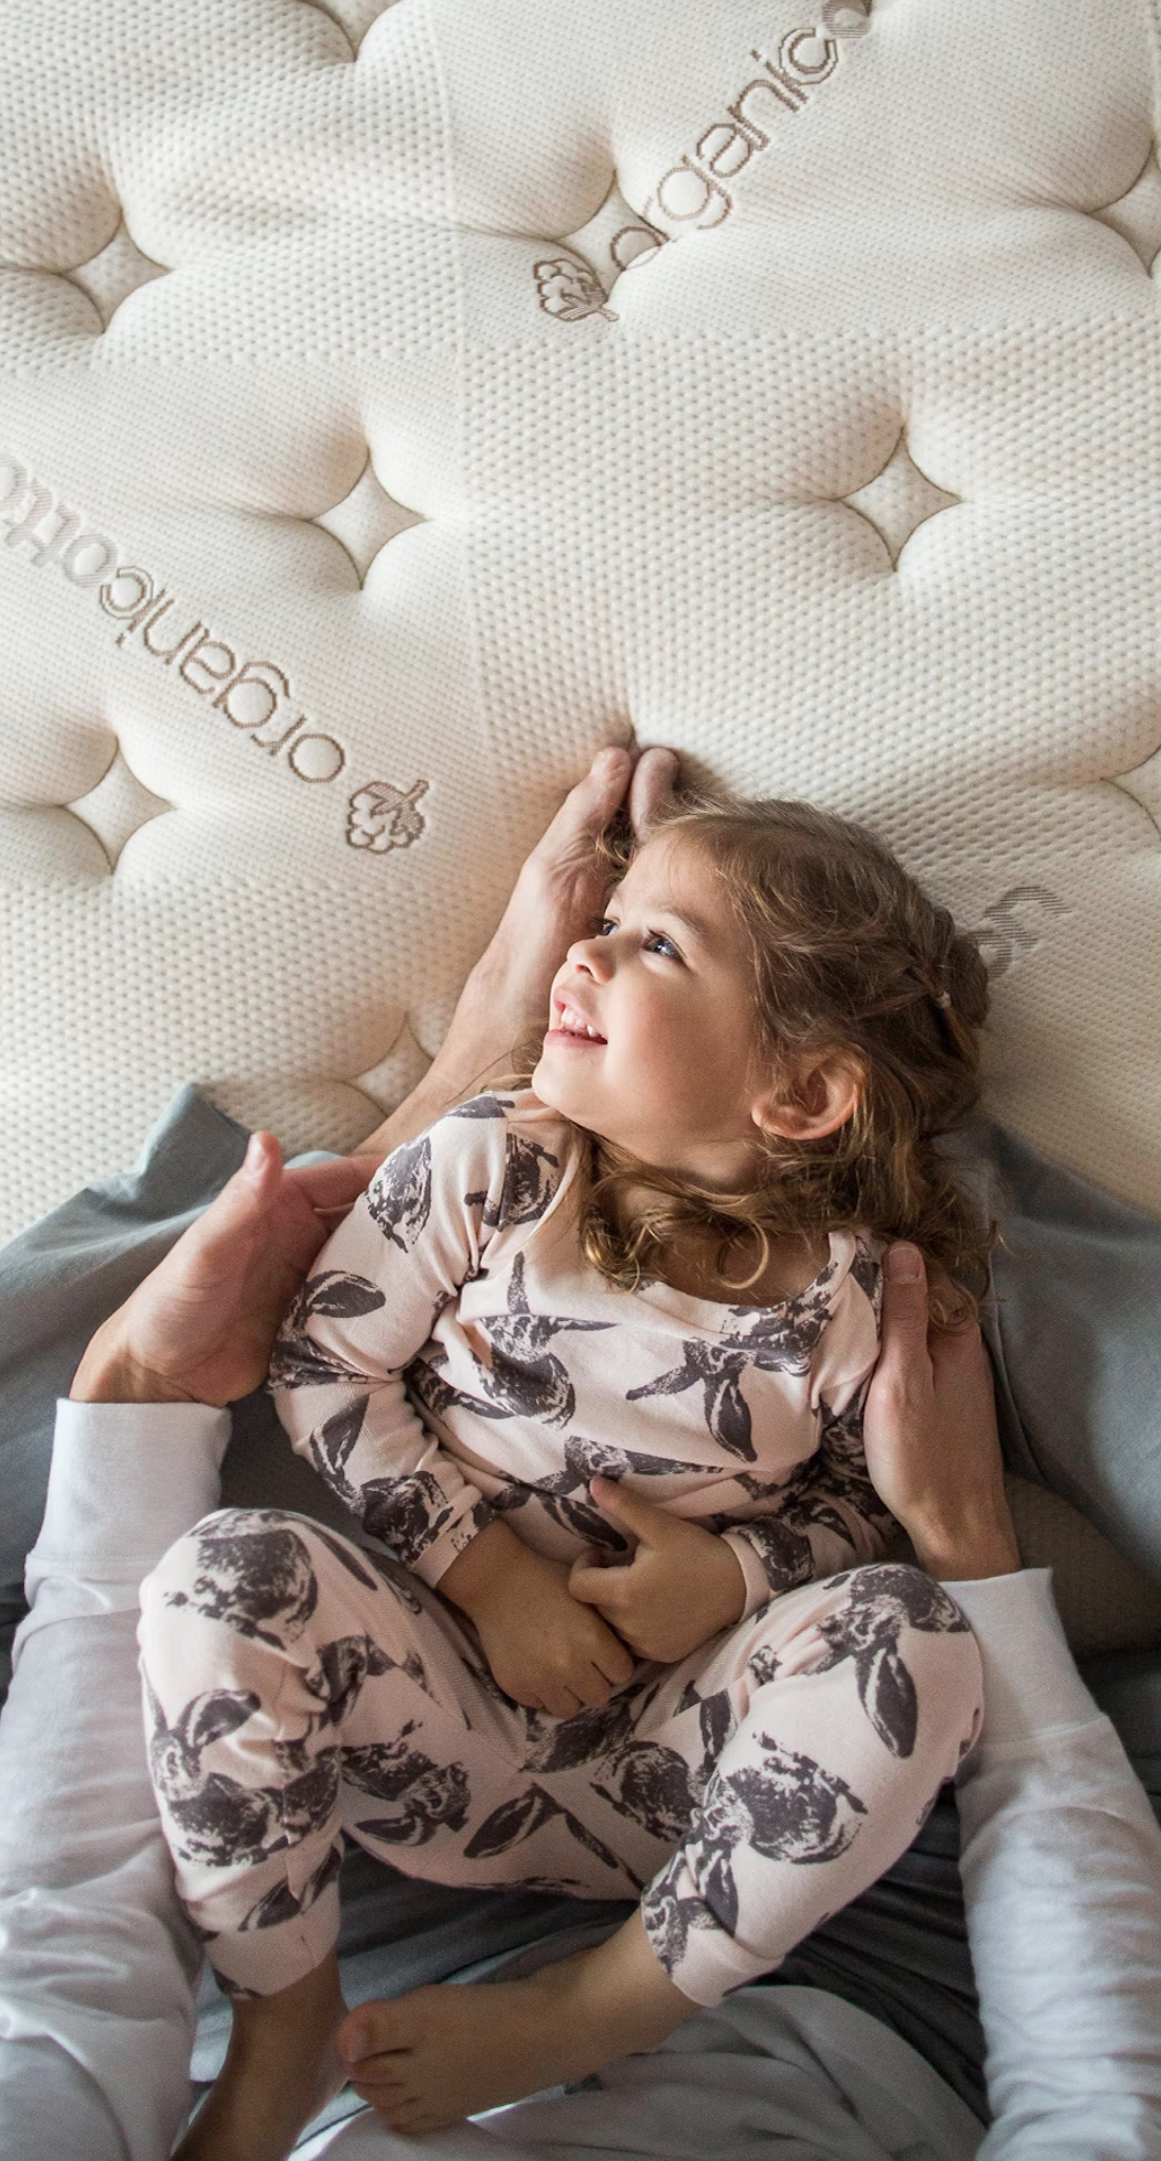 A child lies in the lap of an adult on an eco-friendly foam mattress.